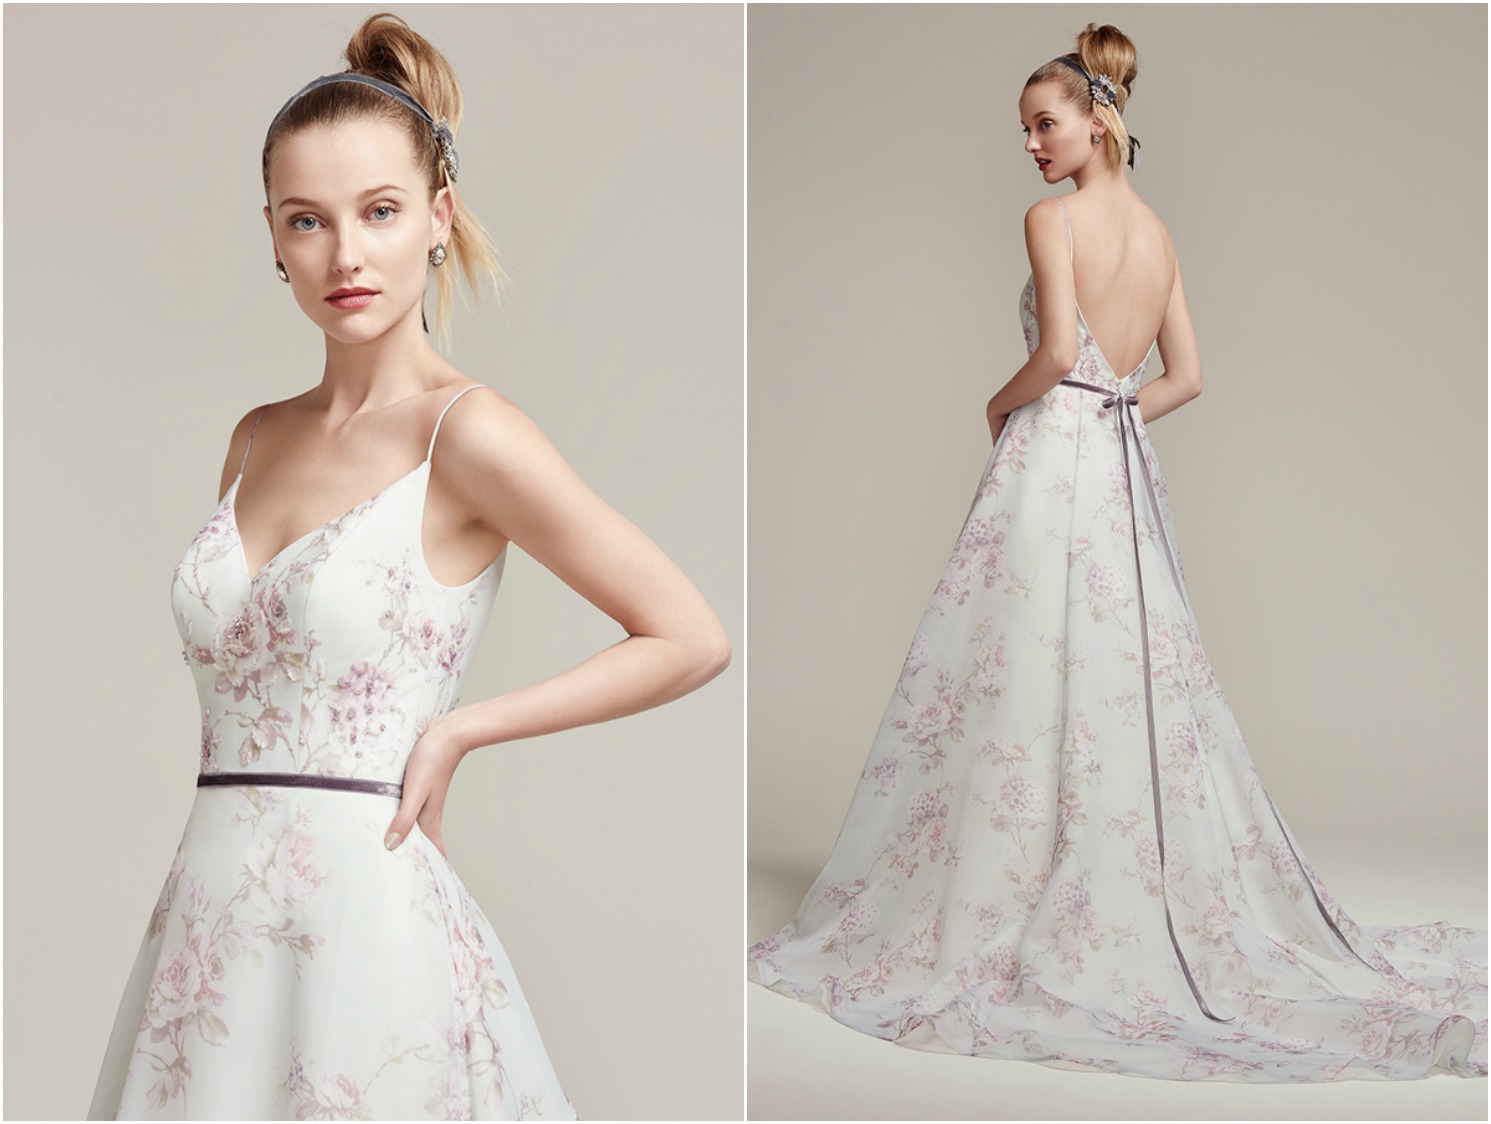 Floral printed chiffon full A-line wedding dress, with ultra-feminine spaghetti straps and V-neckline and plunging back. Finished with zipper closure. Detachable velvet ribbon belt sold separately. 

<a href="https://www.maggiesottero.com/sottero-and-midgley/kira/9865" target="_blank">Sottero &amp; Midgley</a>